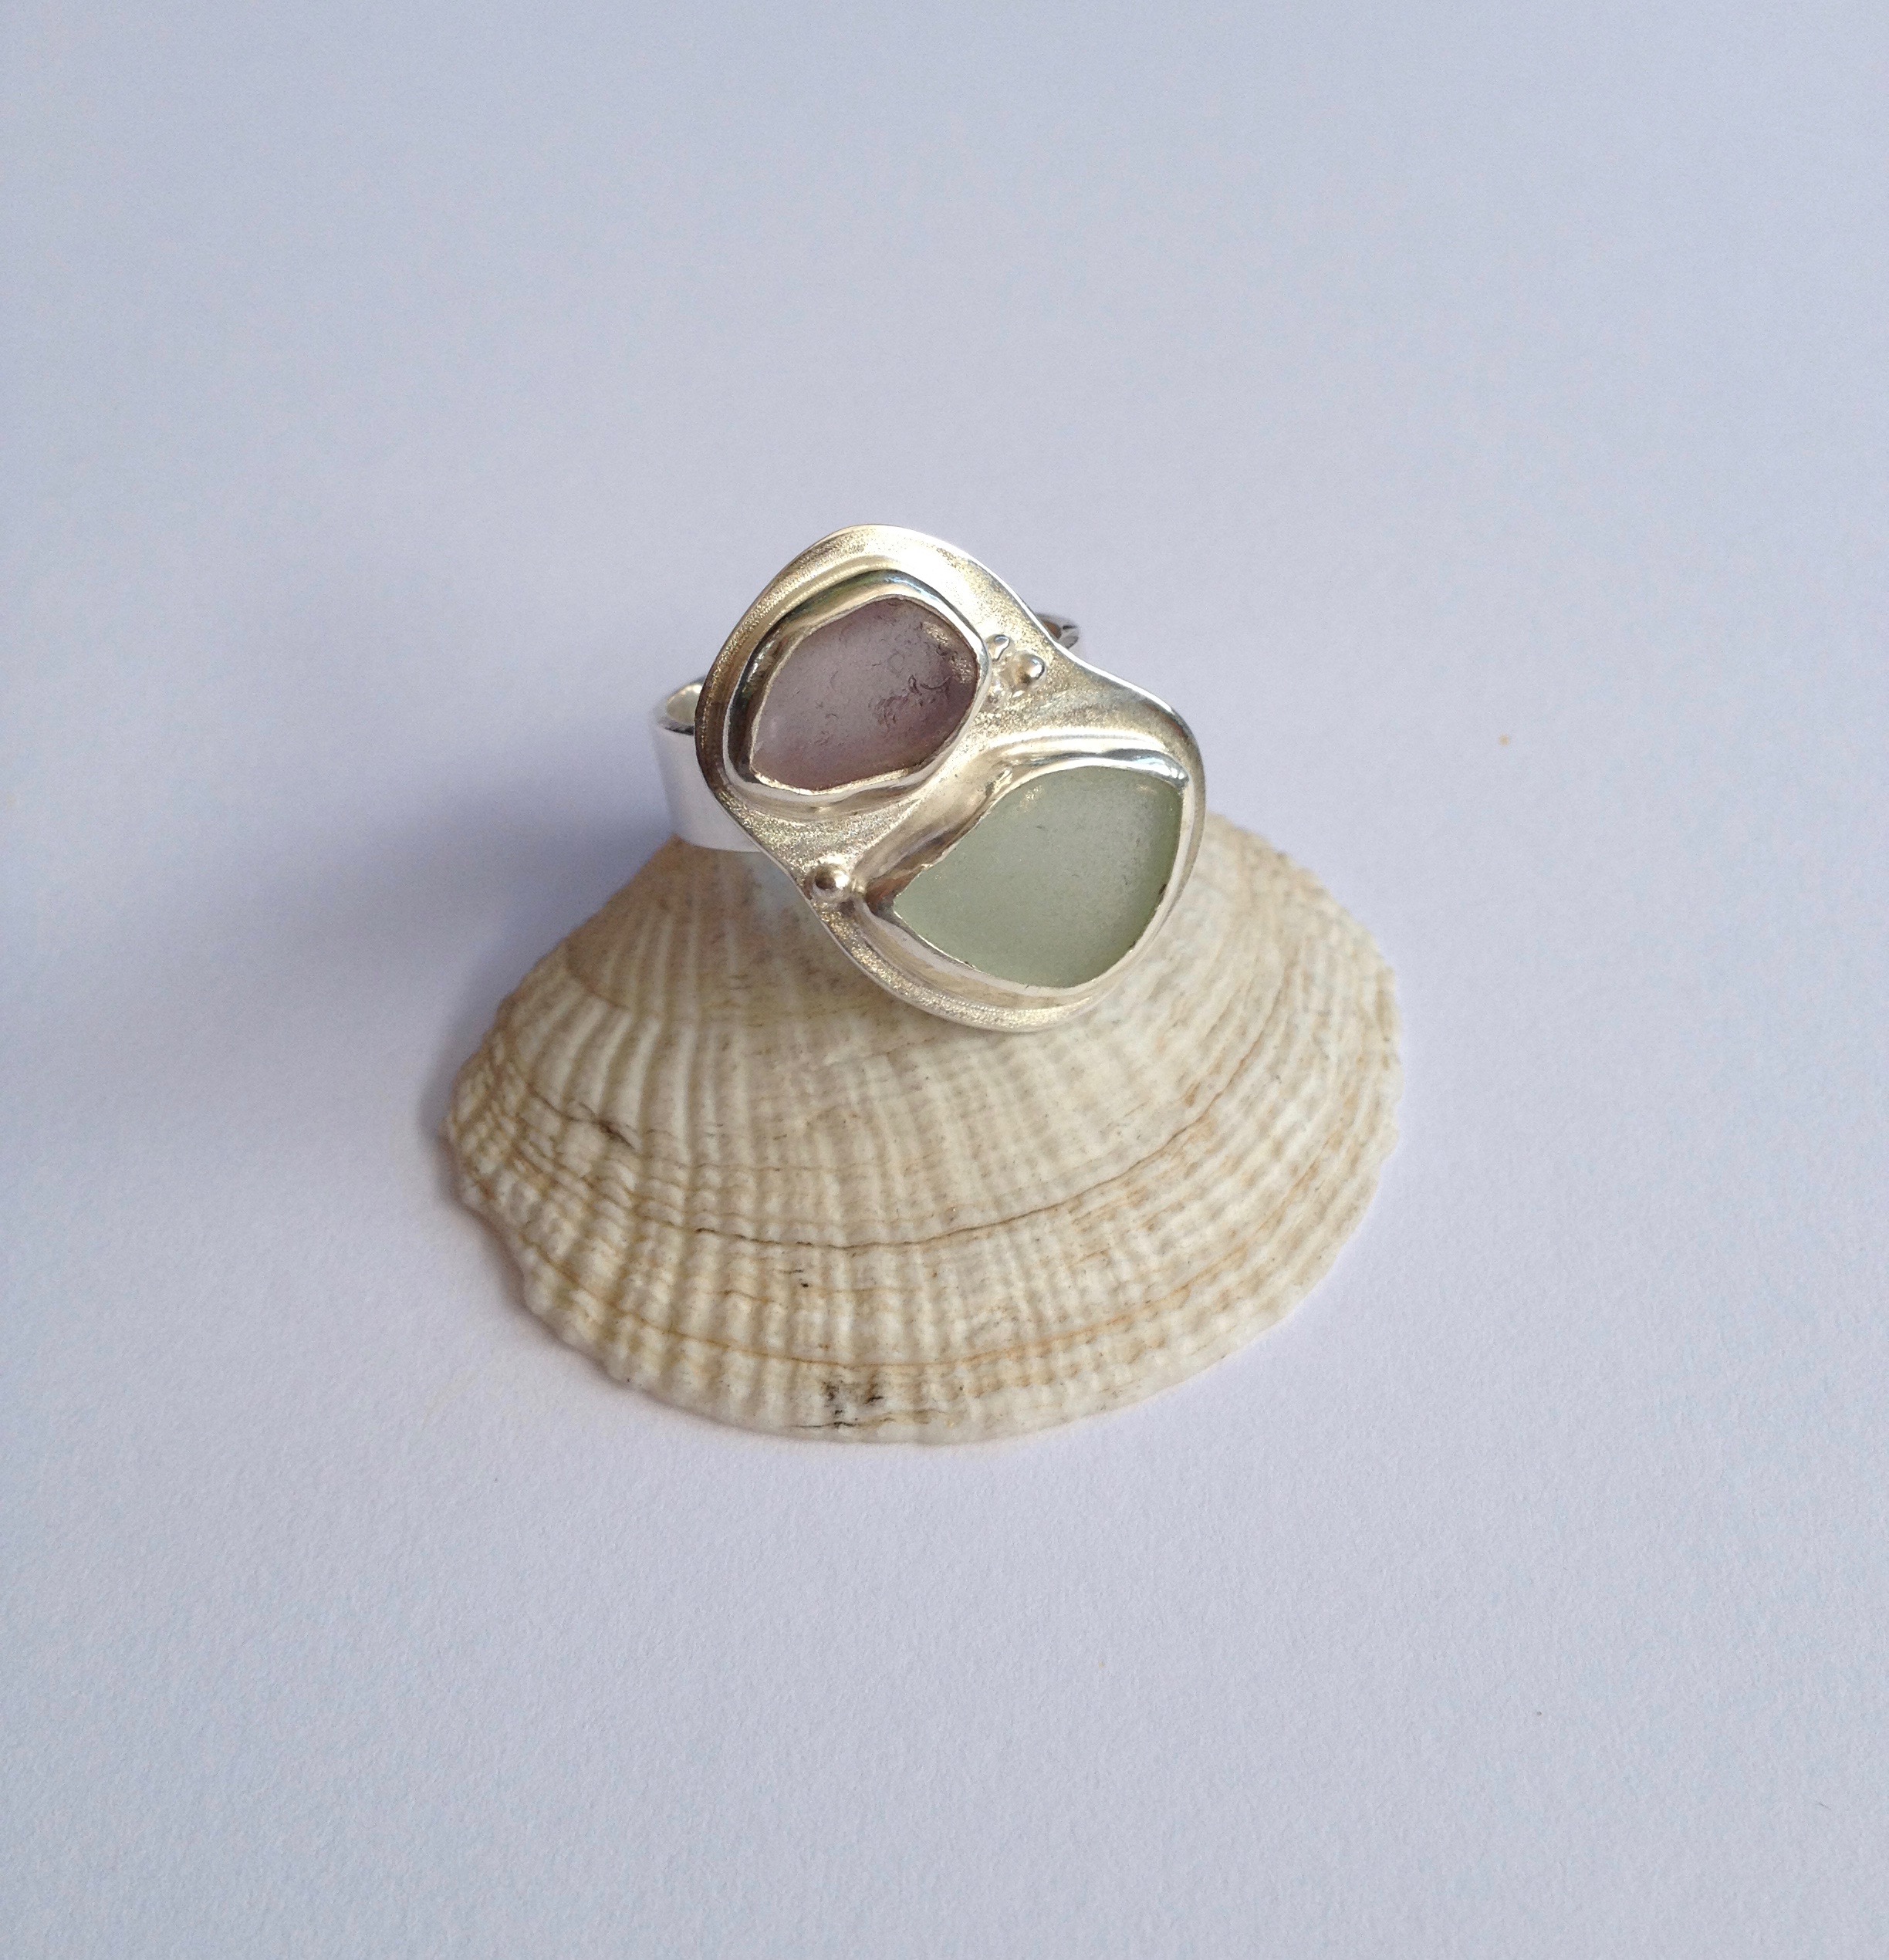 Lavender and Wintergreen Double Sea Glass Ring